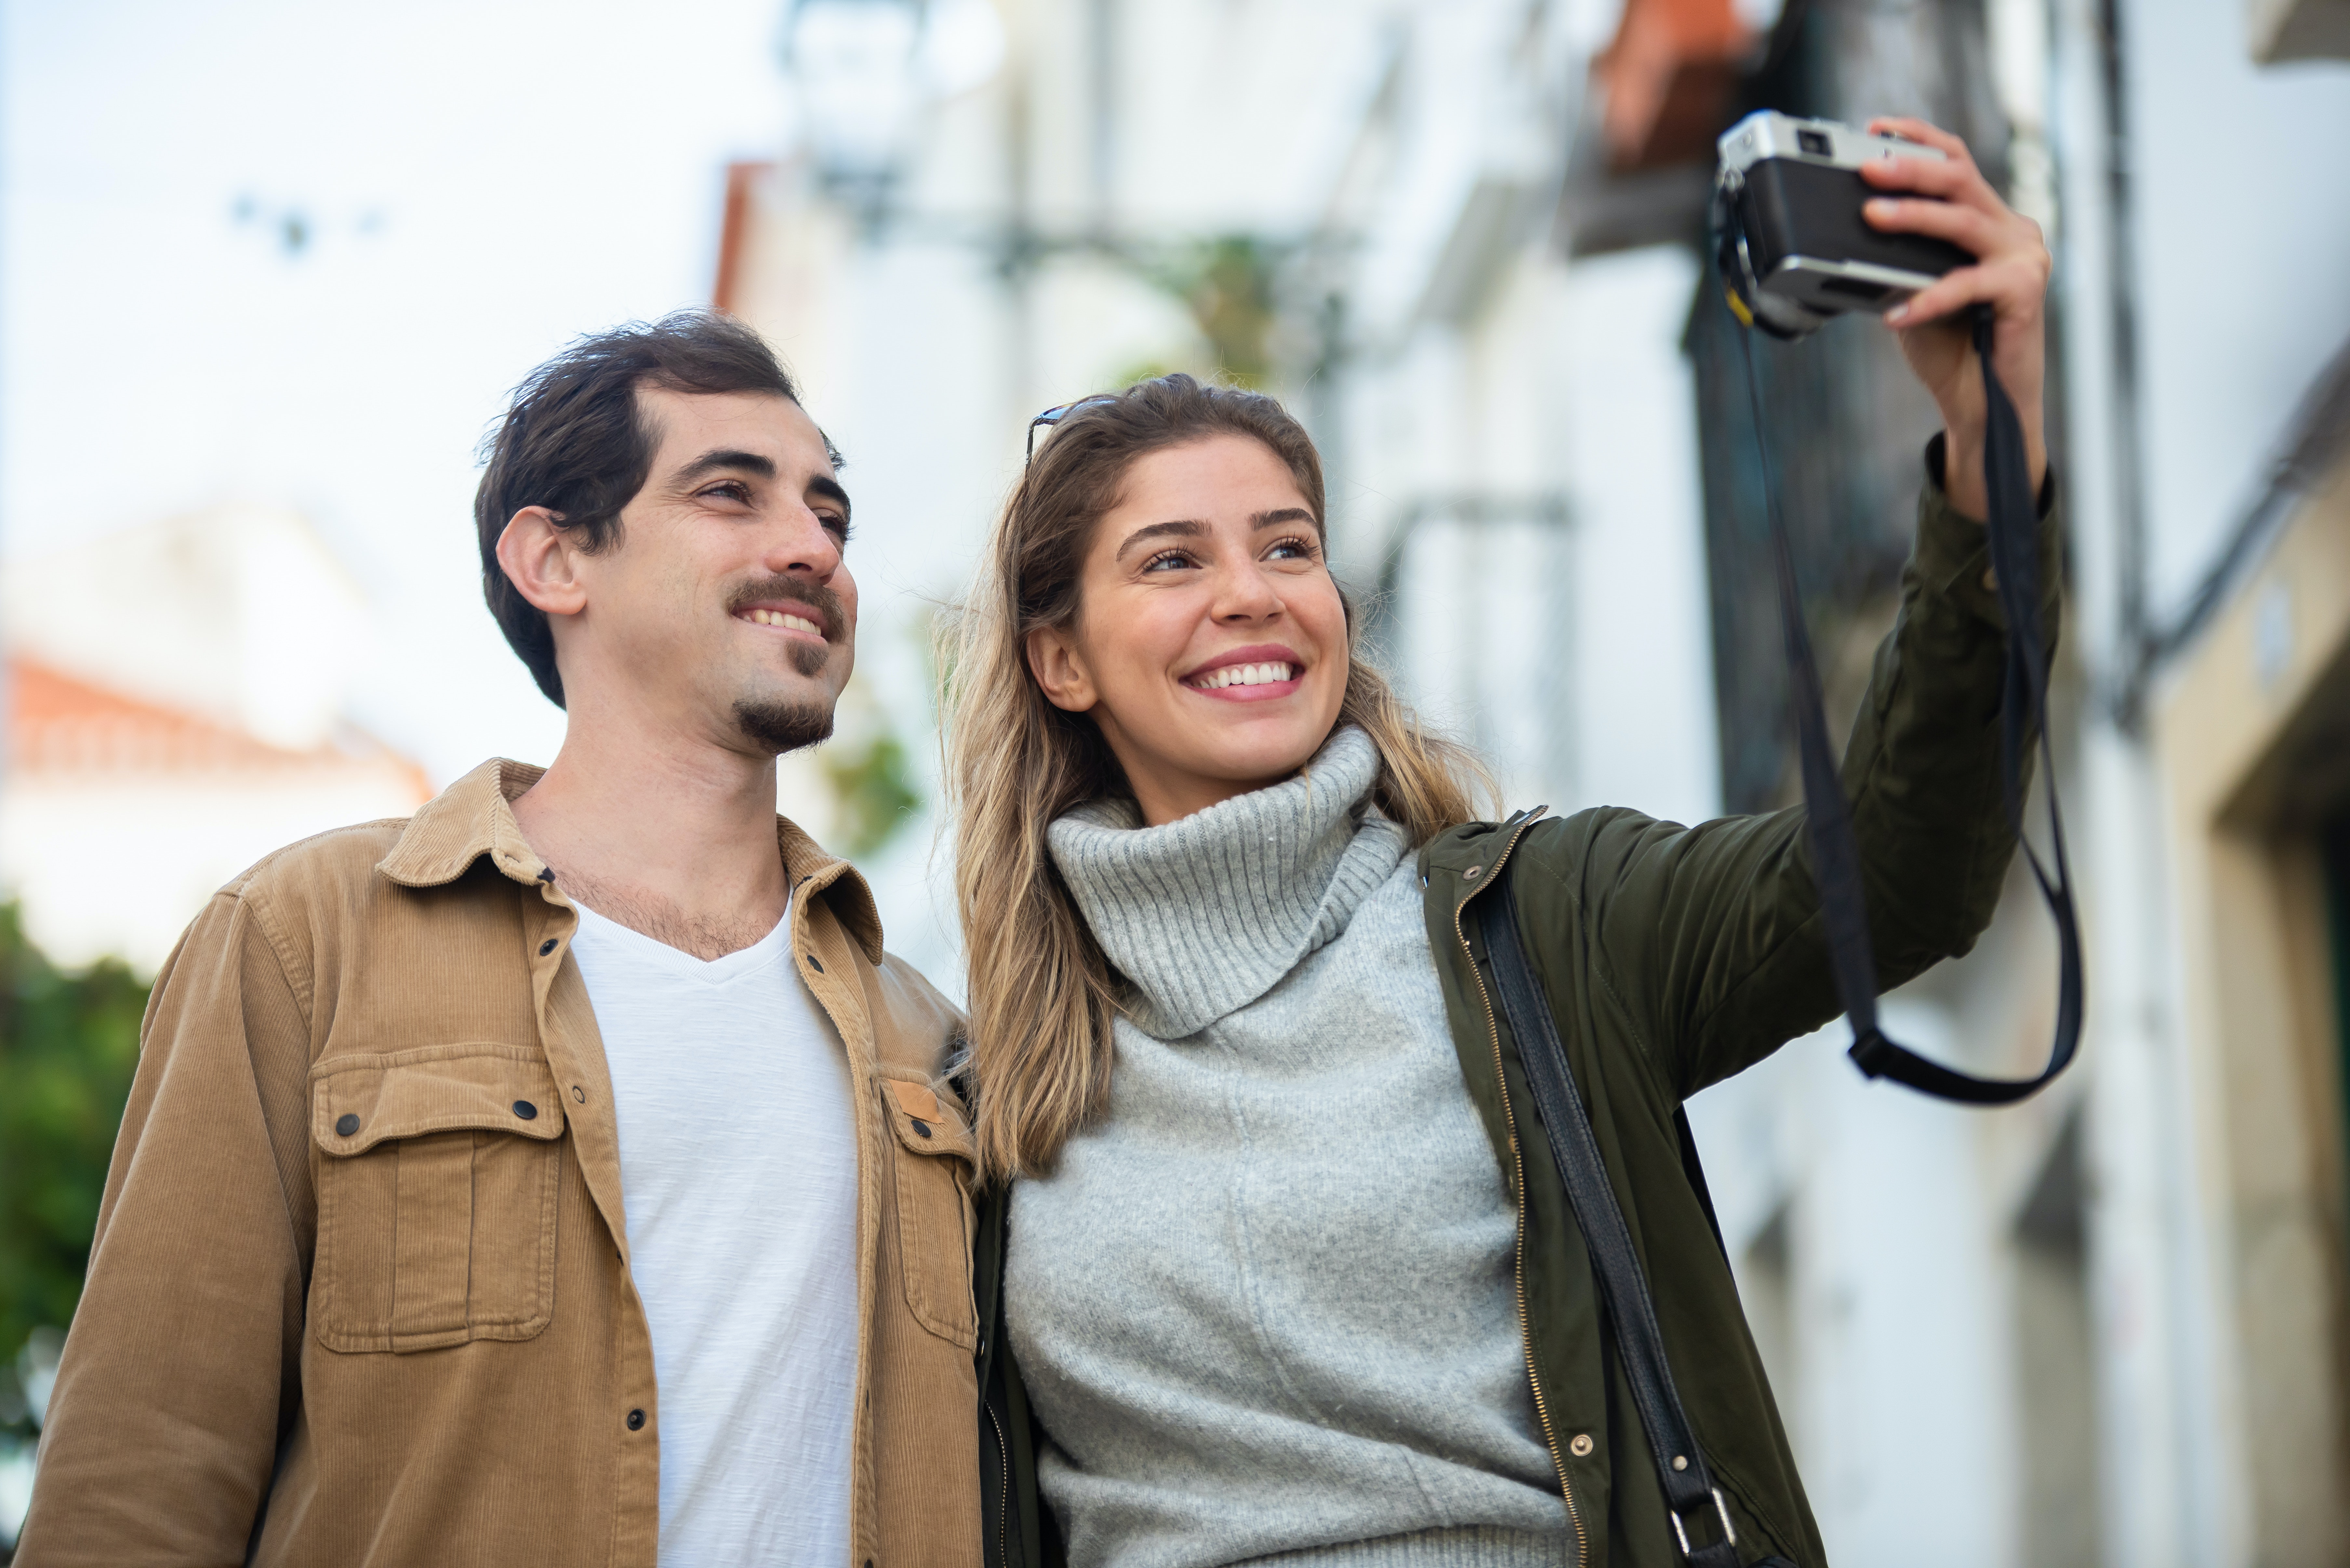 A man and a woman stand close to eachother while she holds outa camera to take a picture of both of them while they smile.